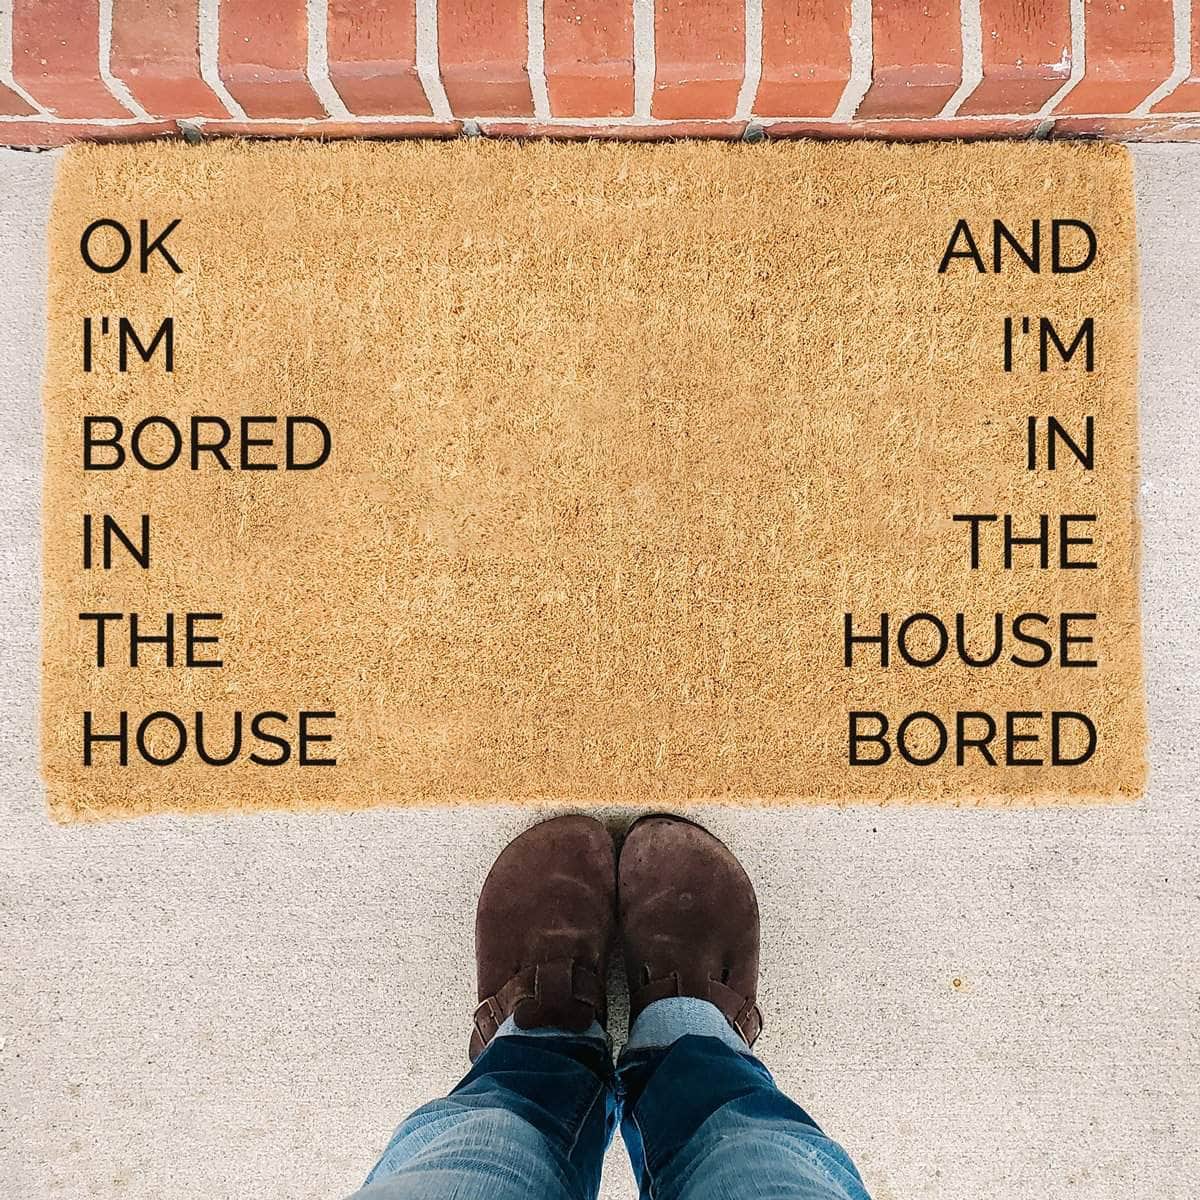 Bored In The House And I'm In The House Bored - Funny Doormat